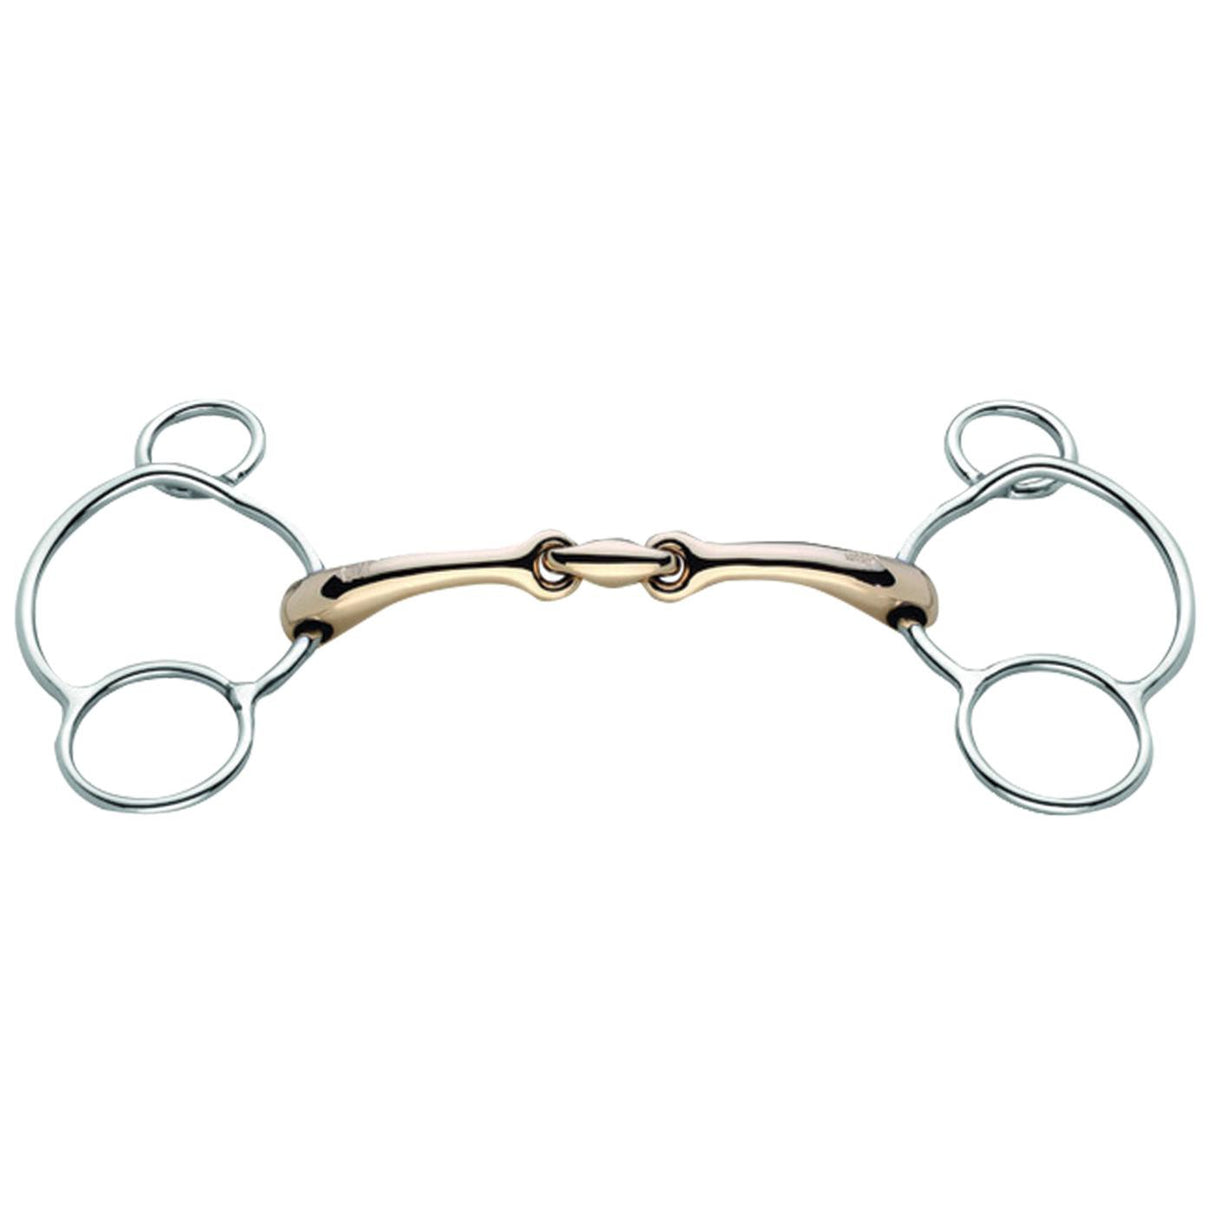 Sprenger Dynamic RS Universal Double Jointed Snaffle Bit - 16 mm